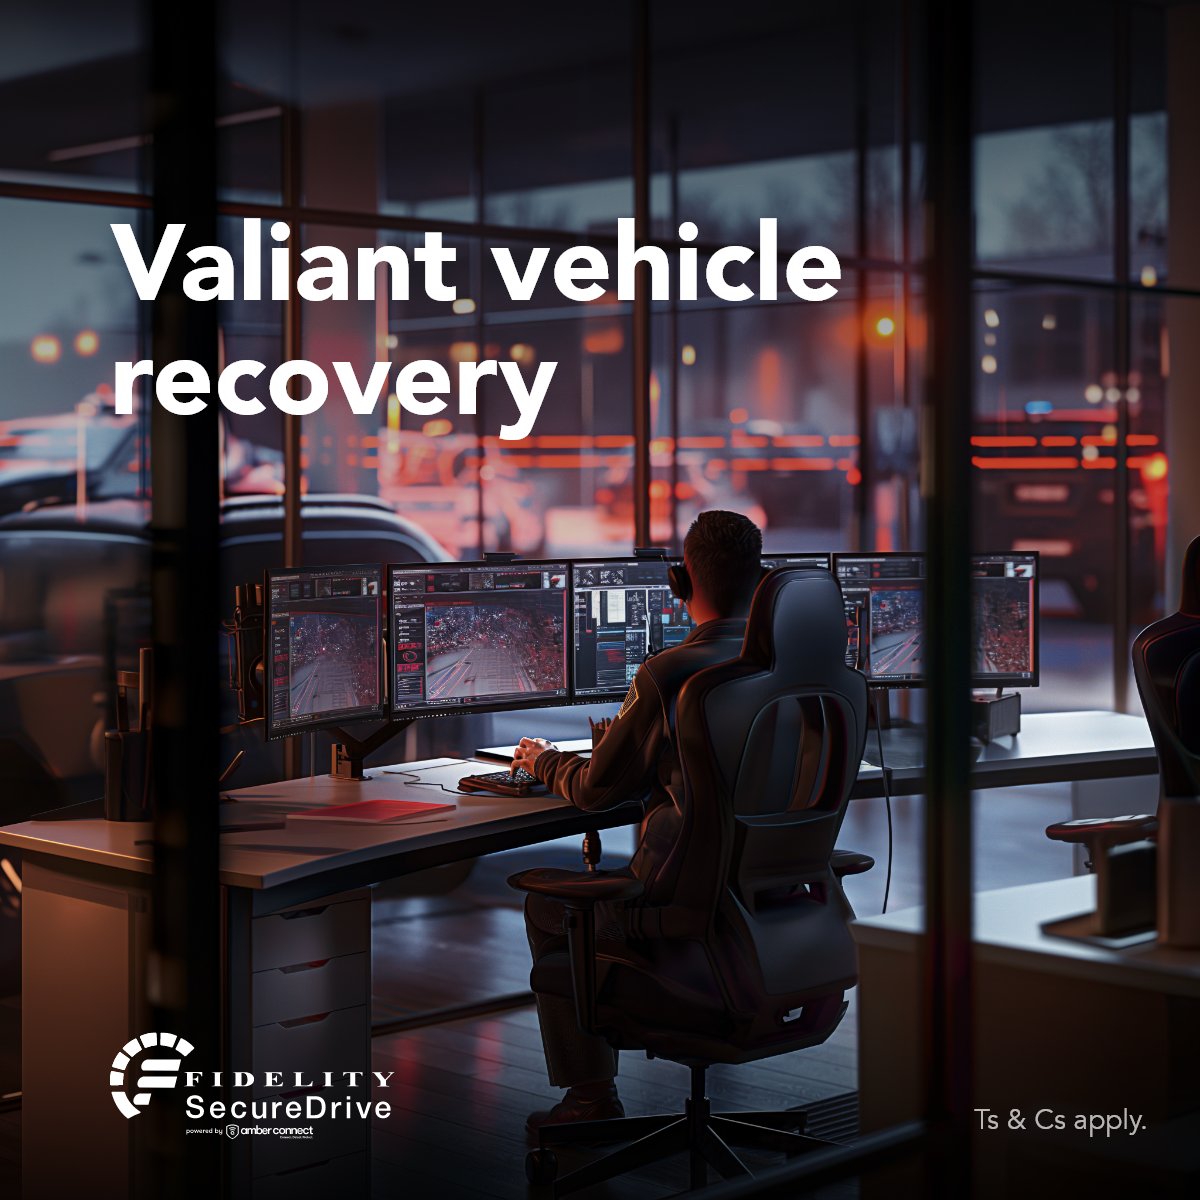 If your vehicle is stolen, Fidelity SecureDrive is on the case of getting it back.

#FidelitySecureDrive #VehicleTracking #YourDrivingCompanion